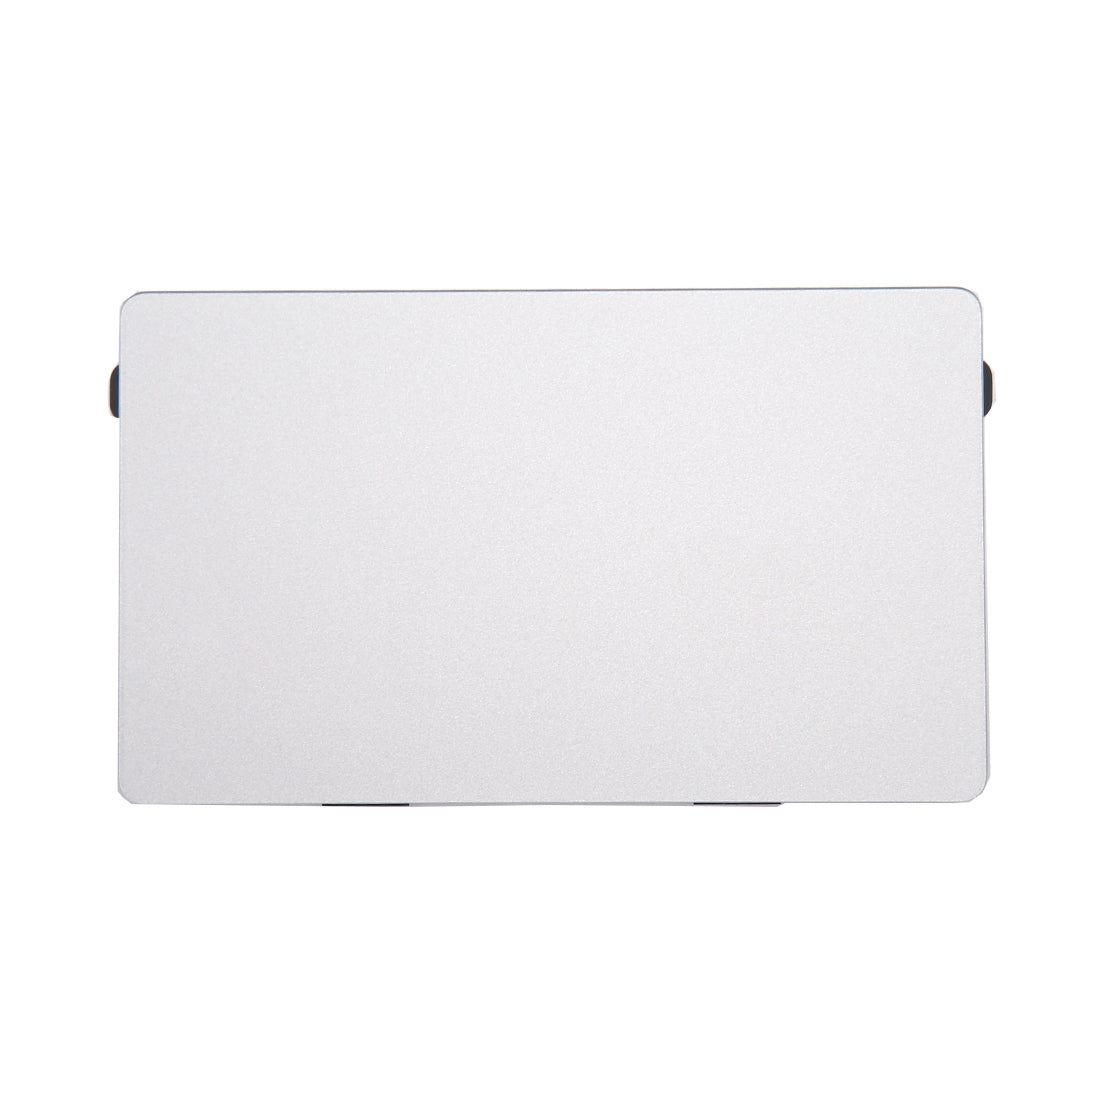 TouchPad Touchpad Apple MacBook Air 11.6 A1465 2013 2015